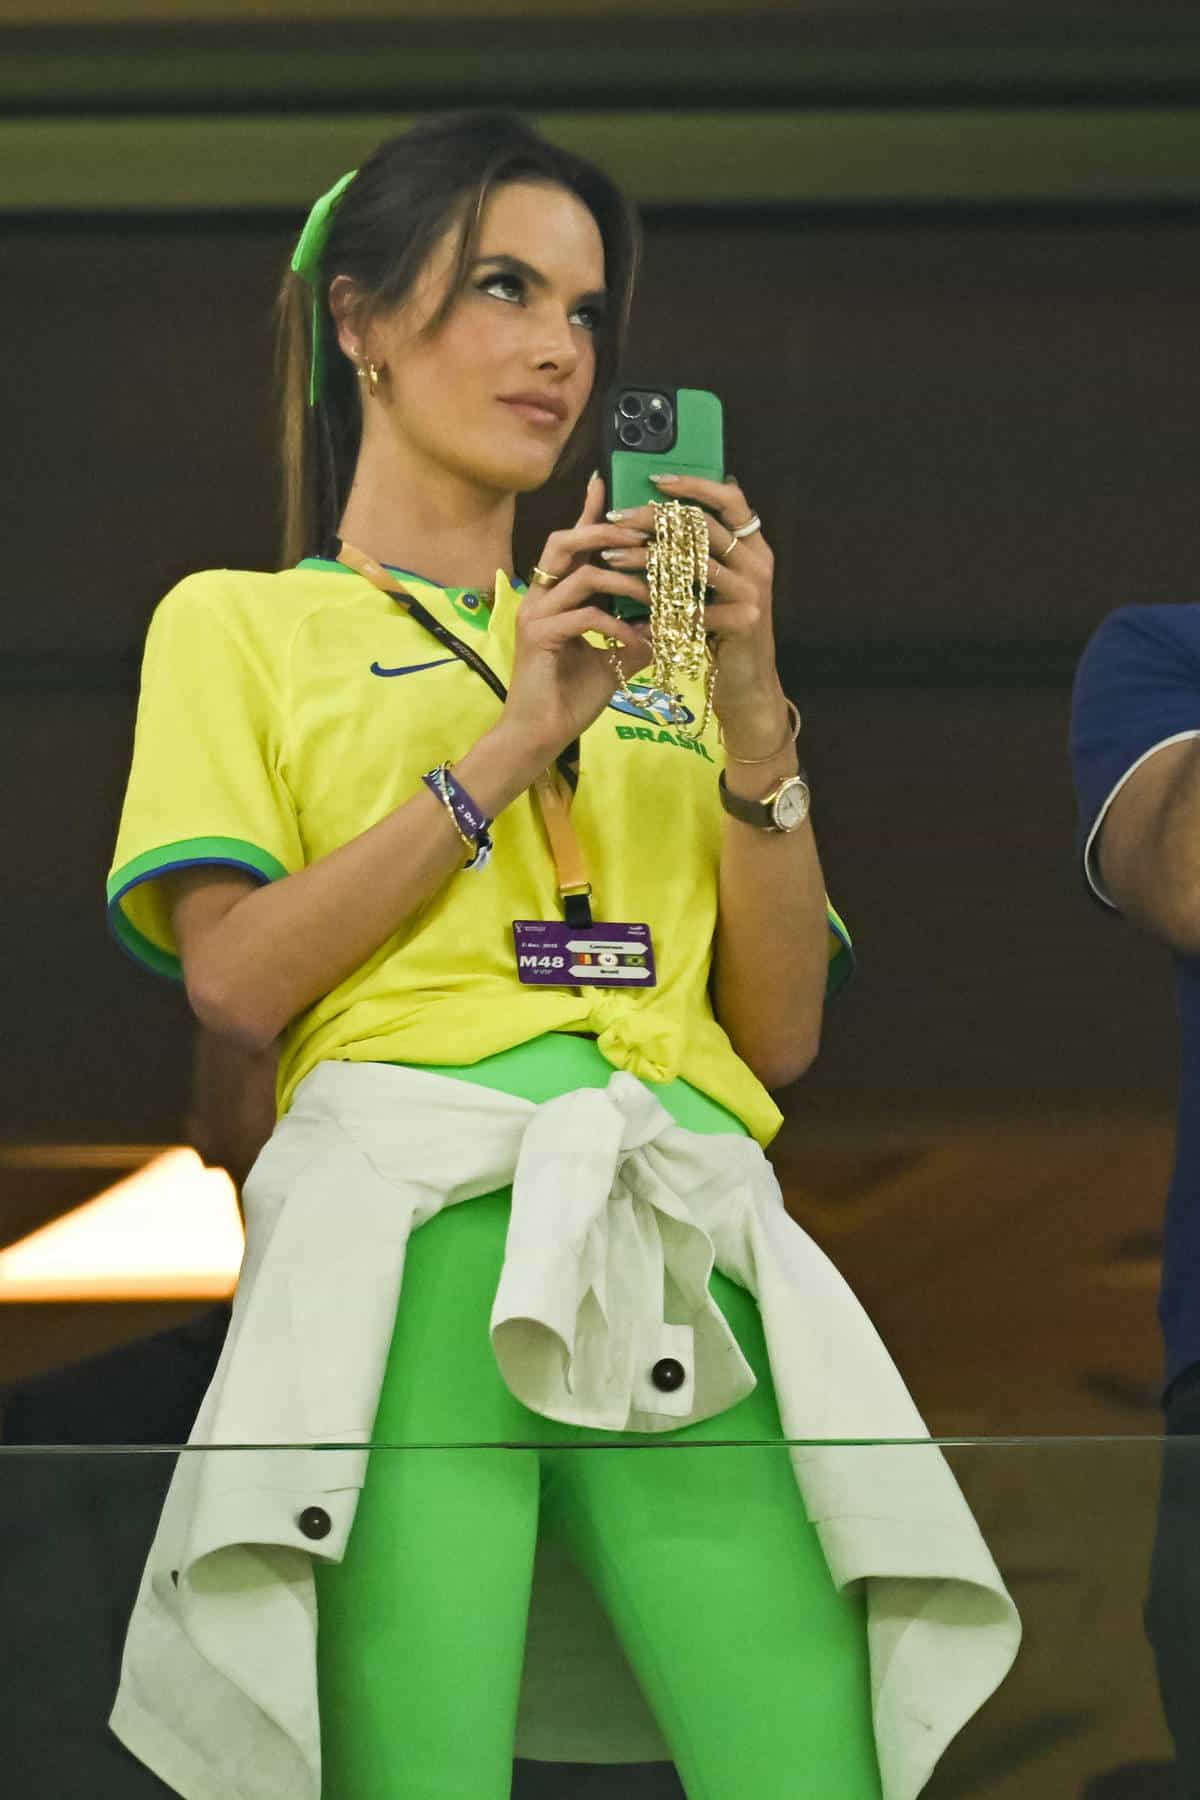 Alessandra Ambrosio in Yellow and Green Proudly Cheering on Brazil in Qatar